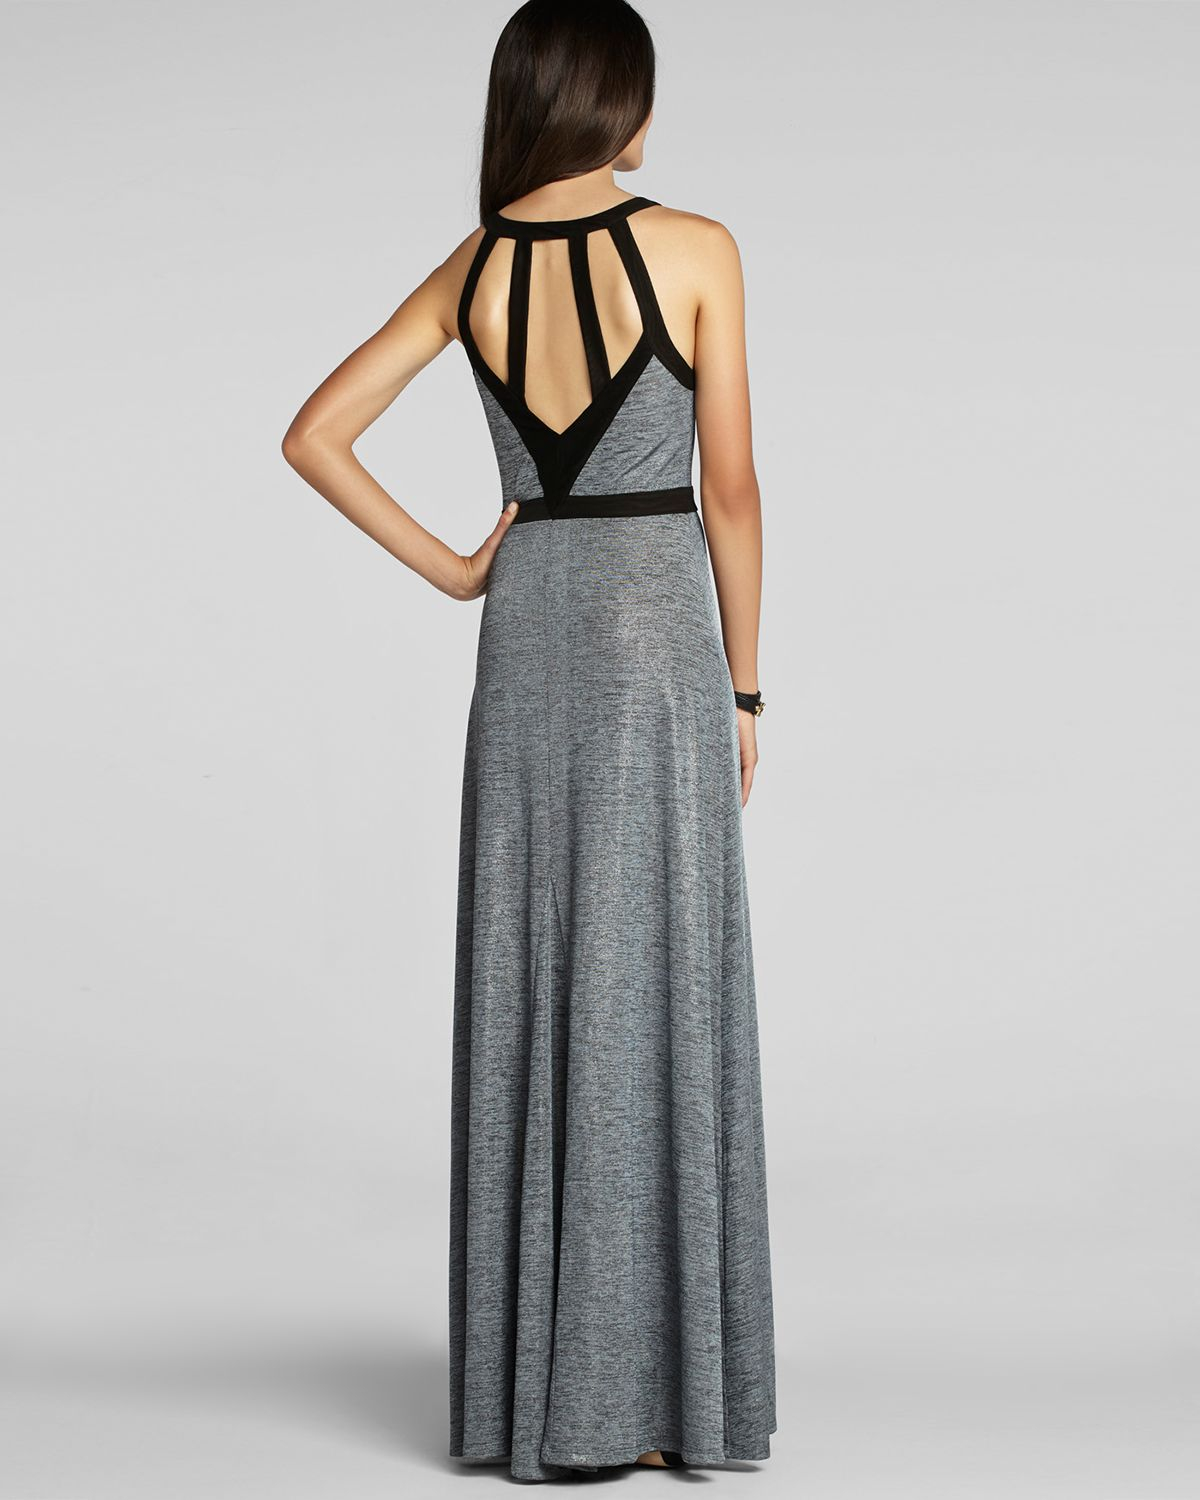 Bcbgeneration Back Cut Out Maxi Dress in Gray | Lyst